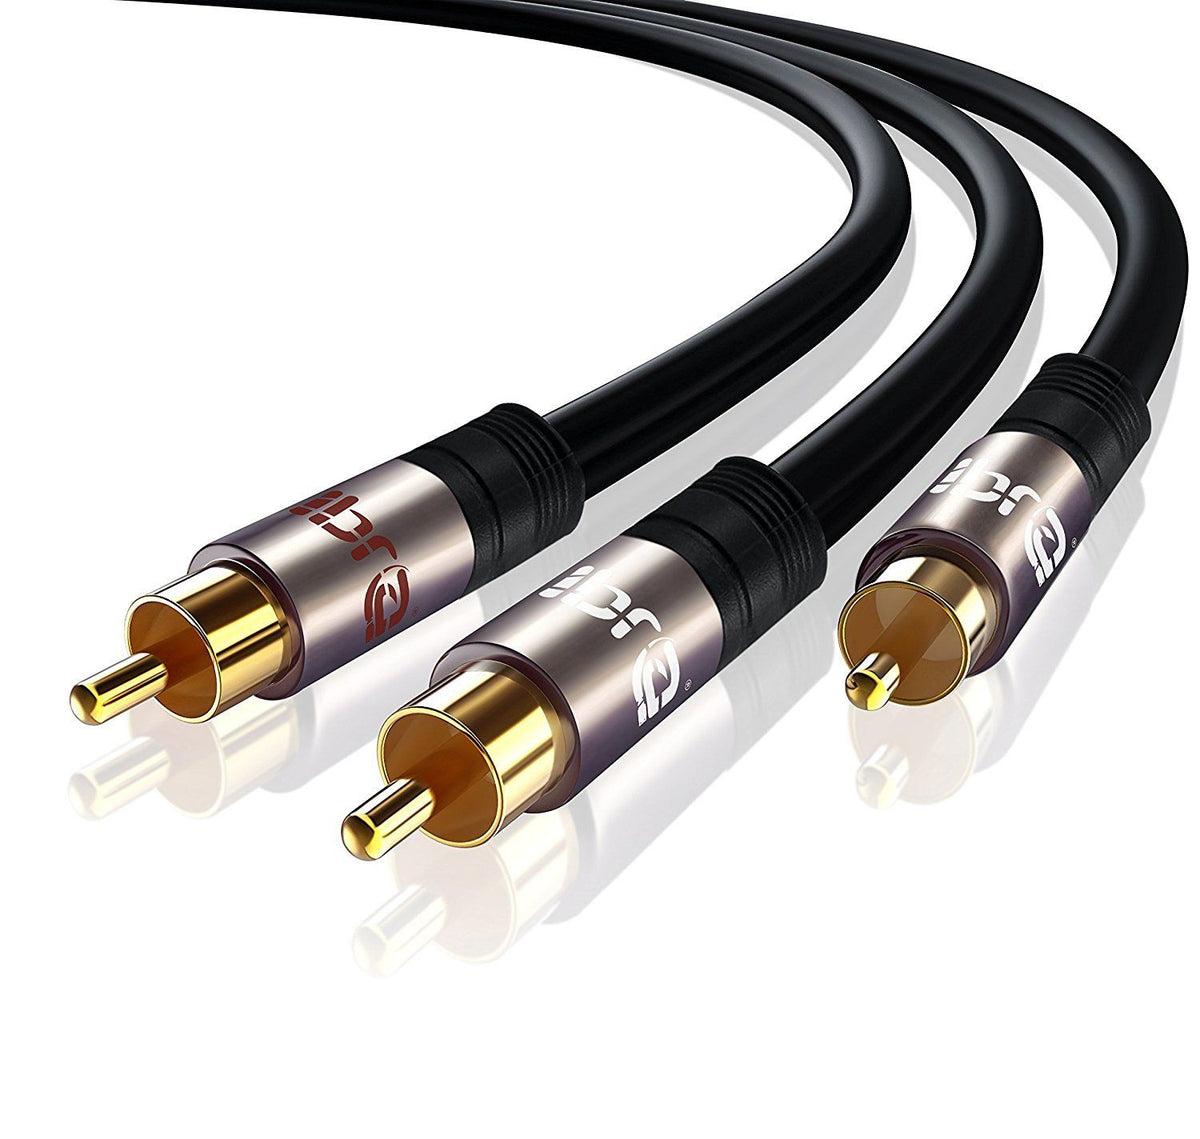 IBRA 5M Y Cable / Subwoofer Cable / Audio Cable / RCA Cable (1 x RCA to 2 x RCA) - GUN Metal Range